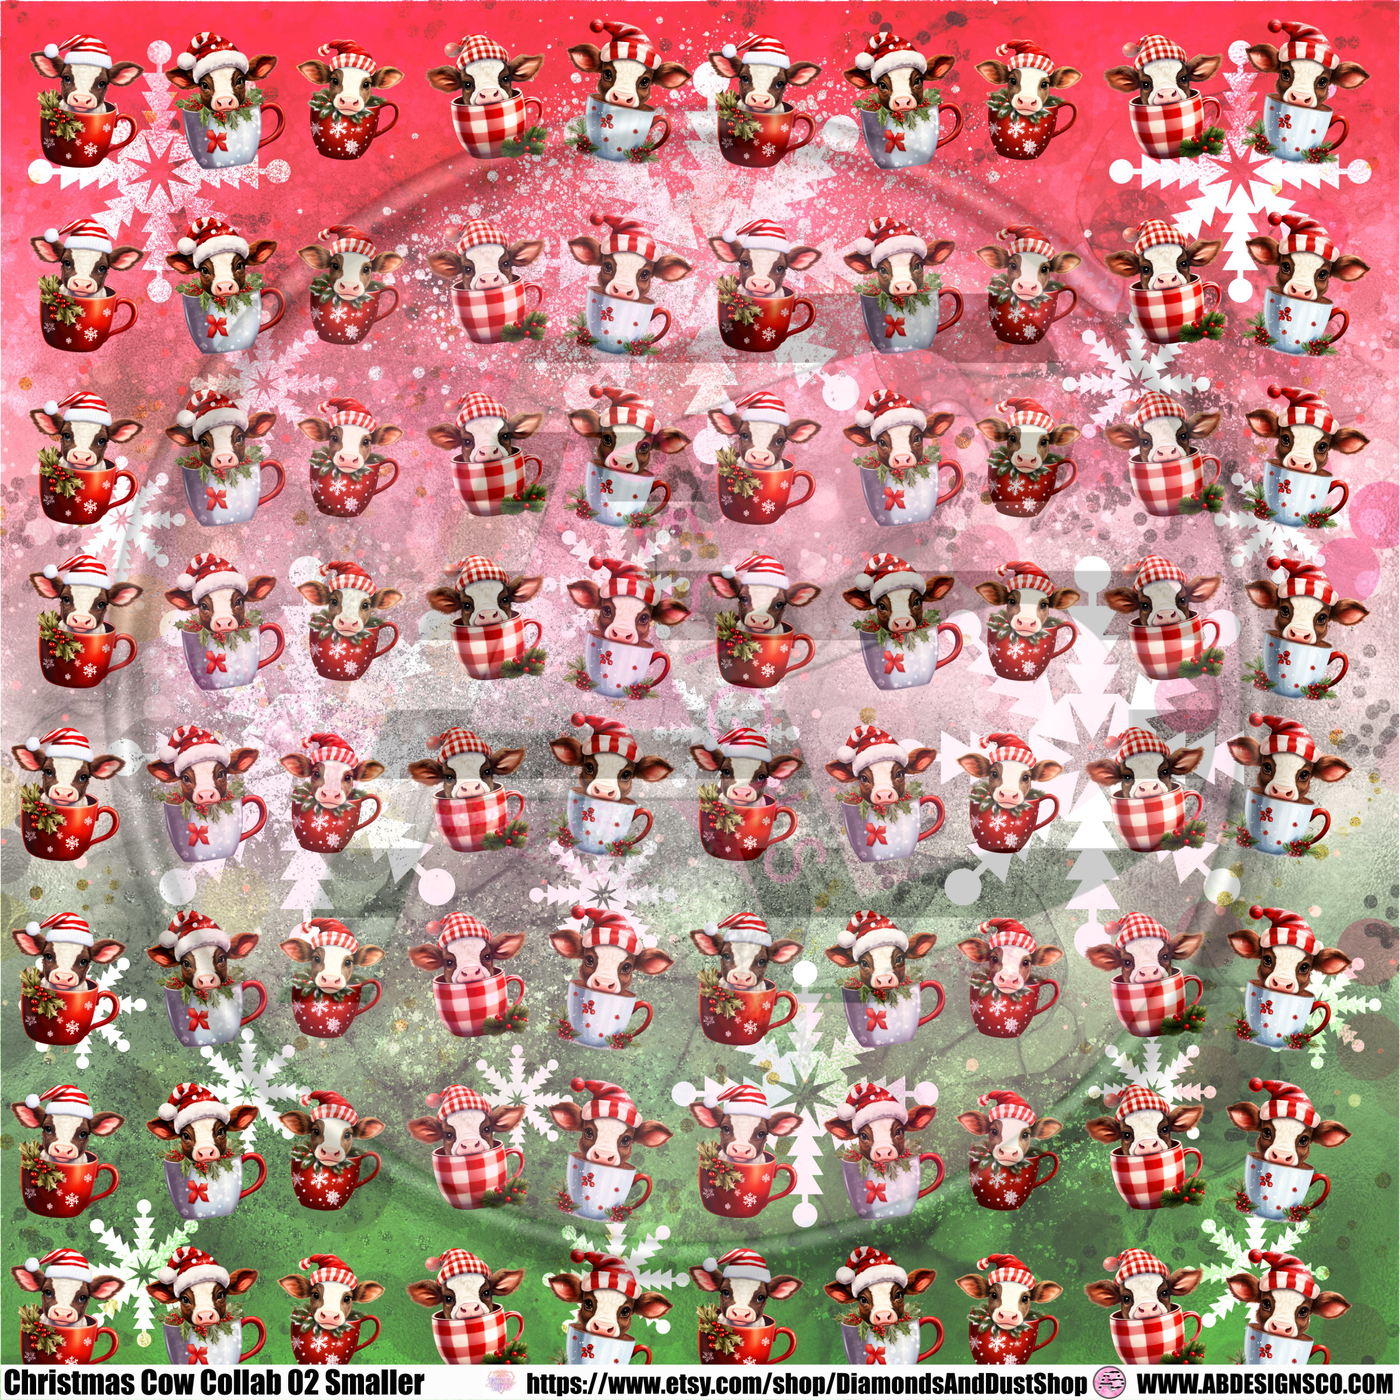 Adhesive Patterned Vinyl - Christmas Cow Collab 02 Smaller